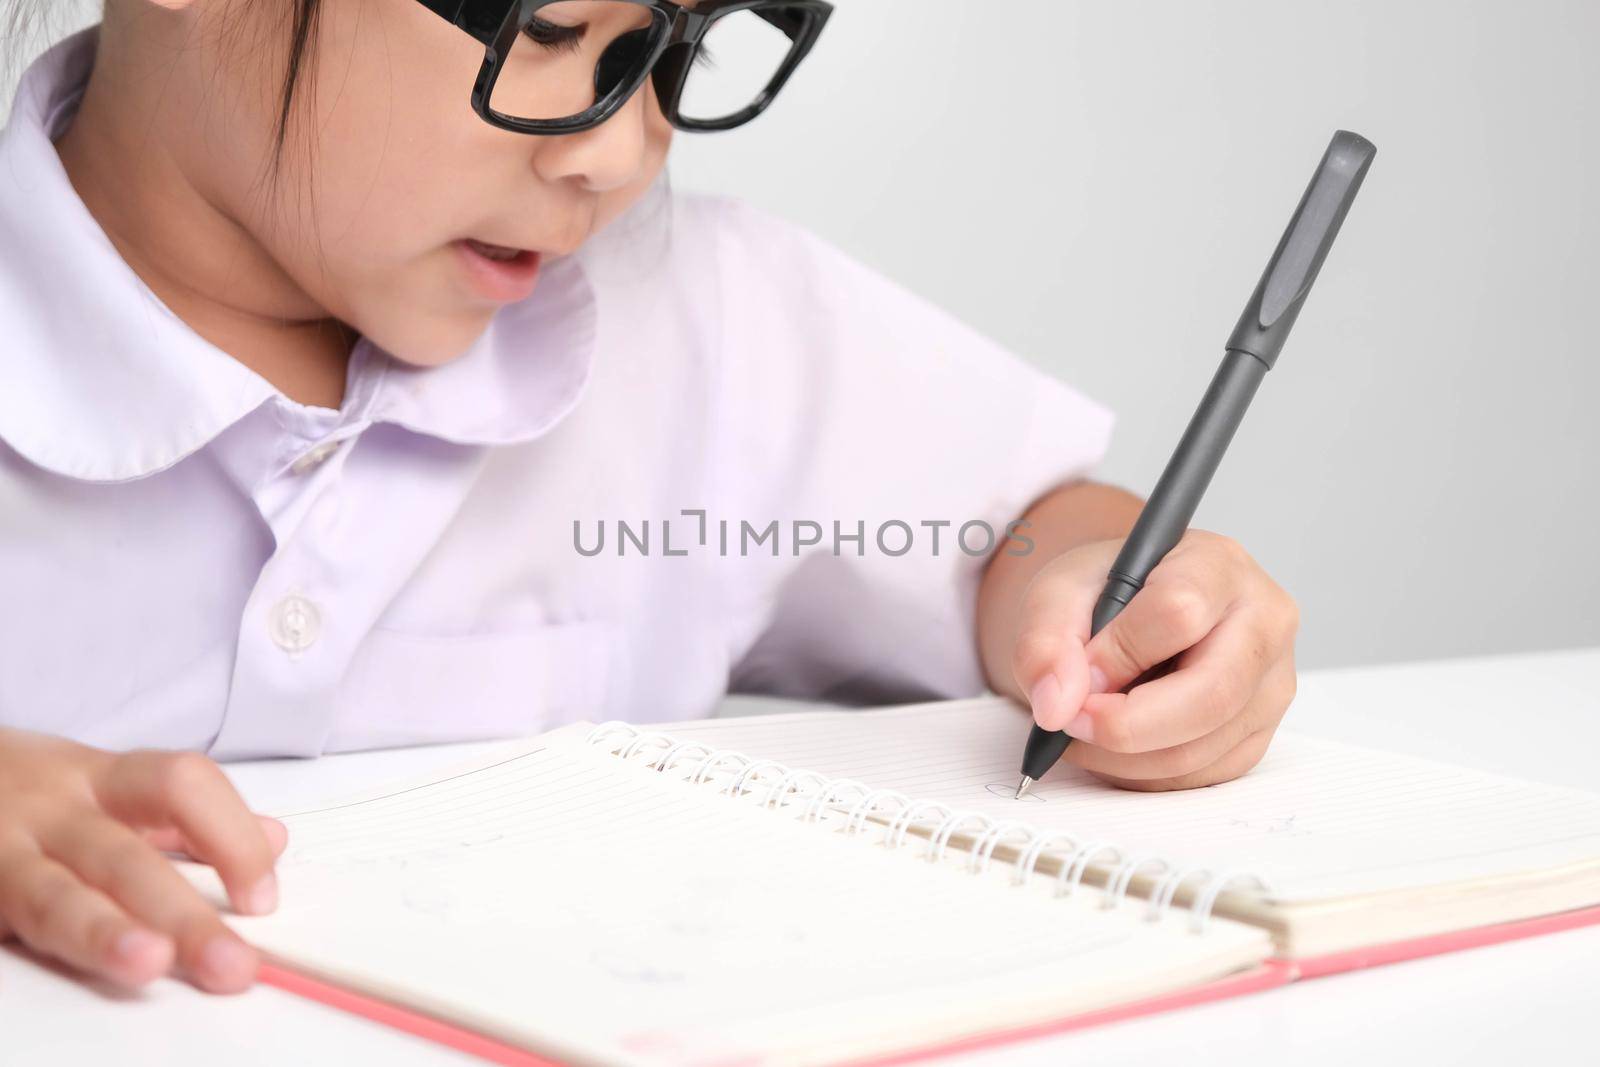 Small businesswoman taking notes while working in the office. Children and business concepts by TEERASAK